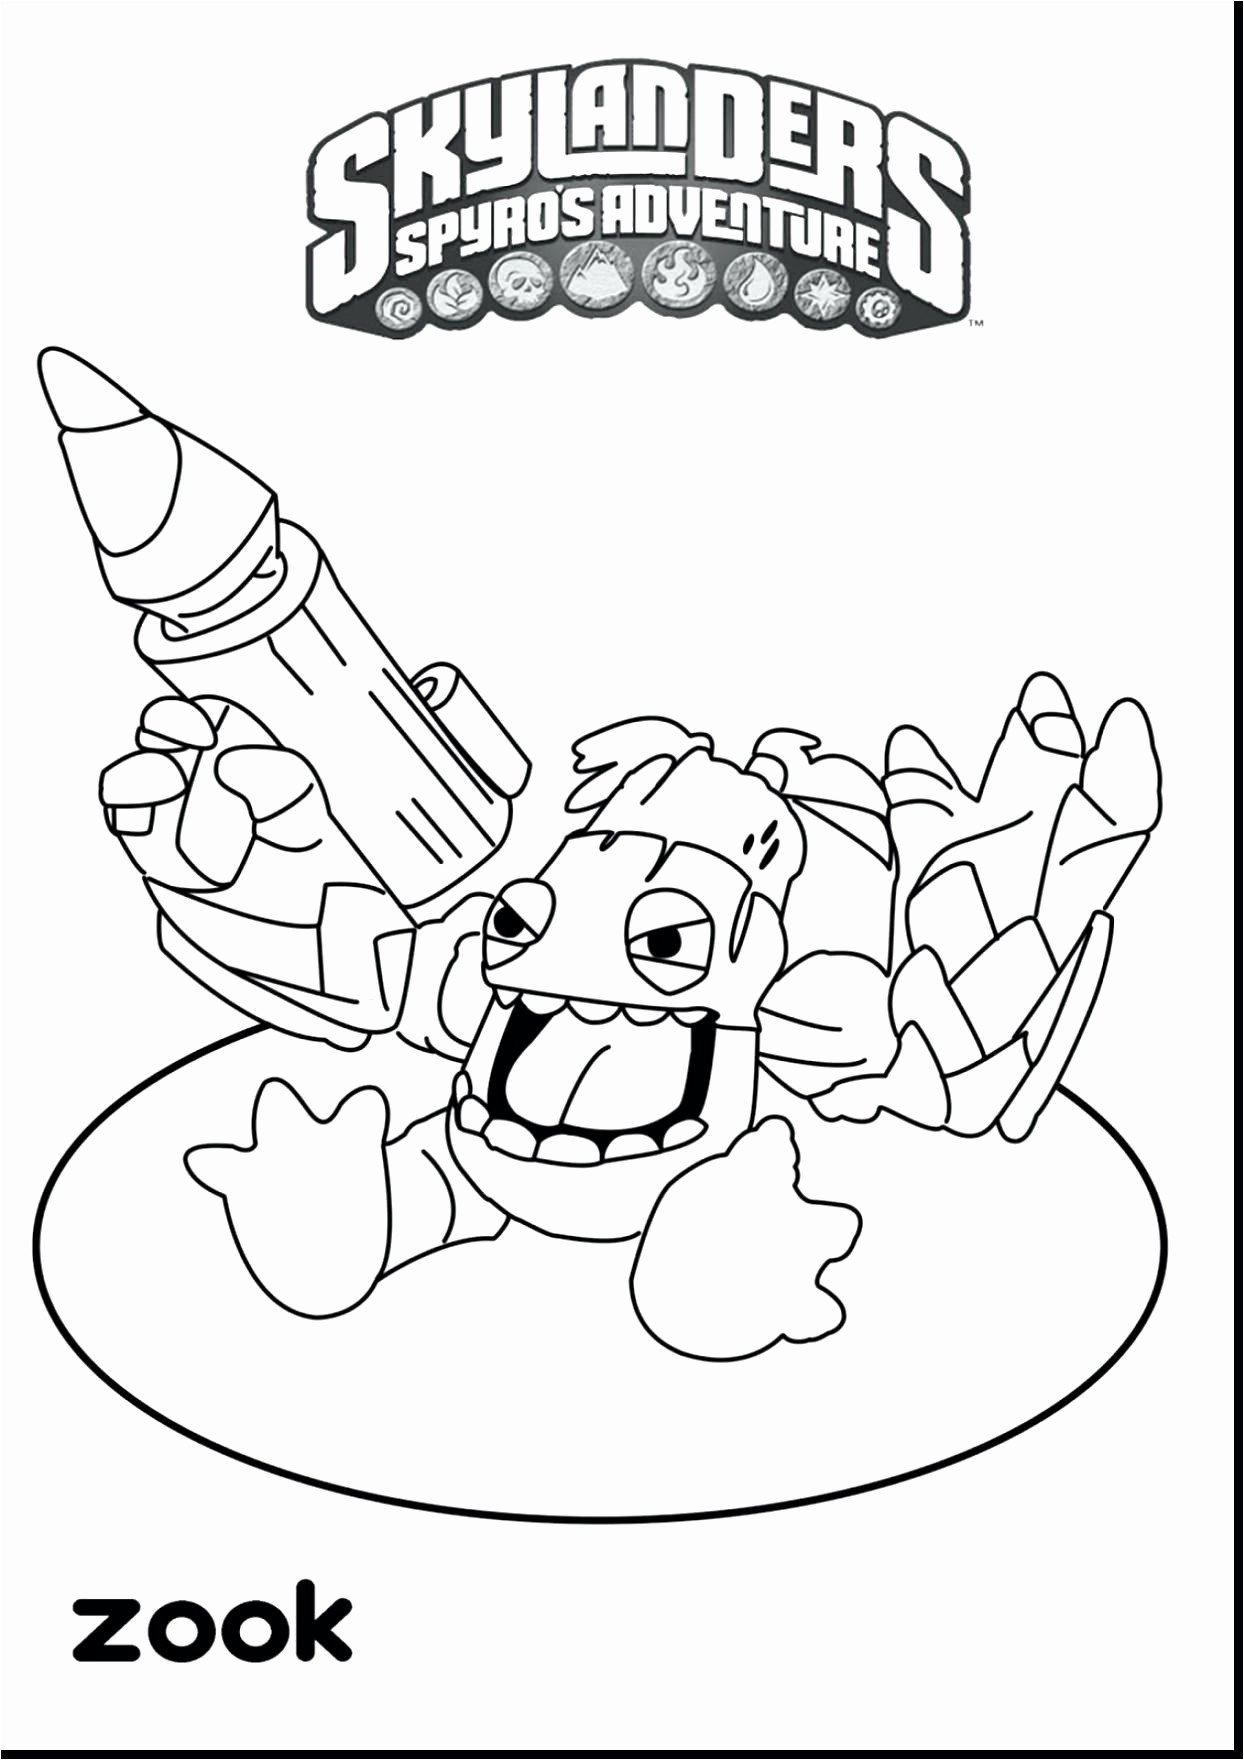 Giratina Coloring Pages Coloring Ideas Giratina Coloring Pages Newting Gallery Of Iqa